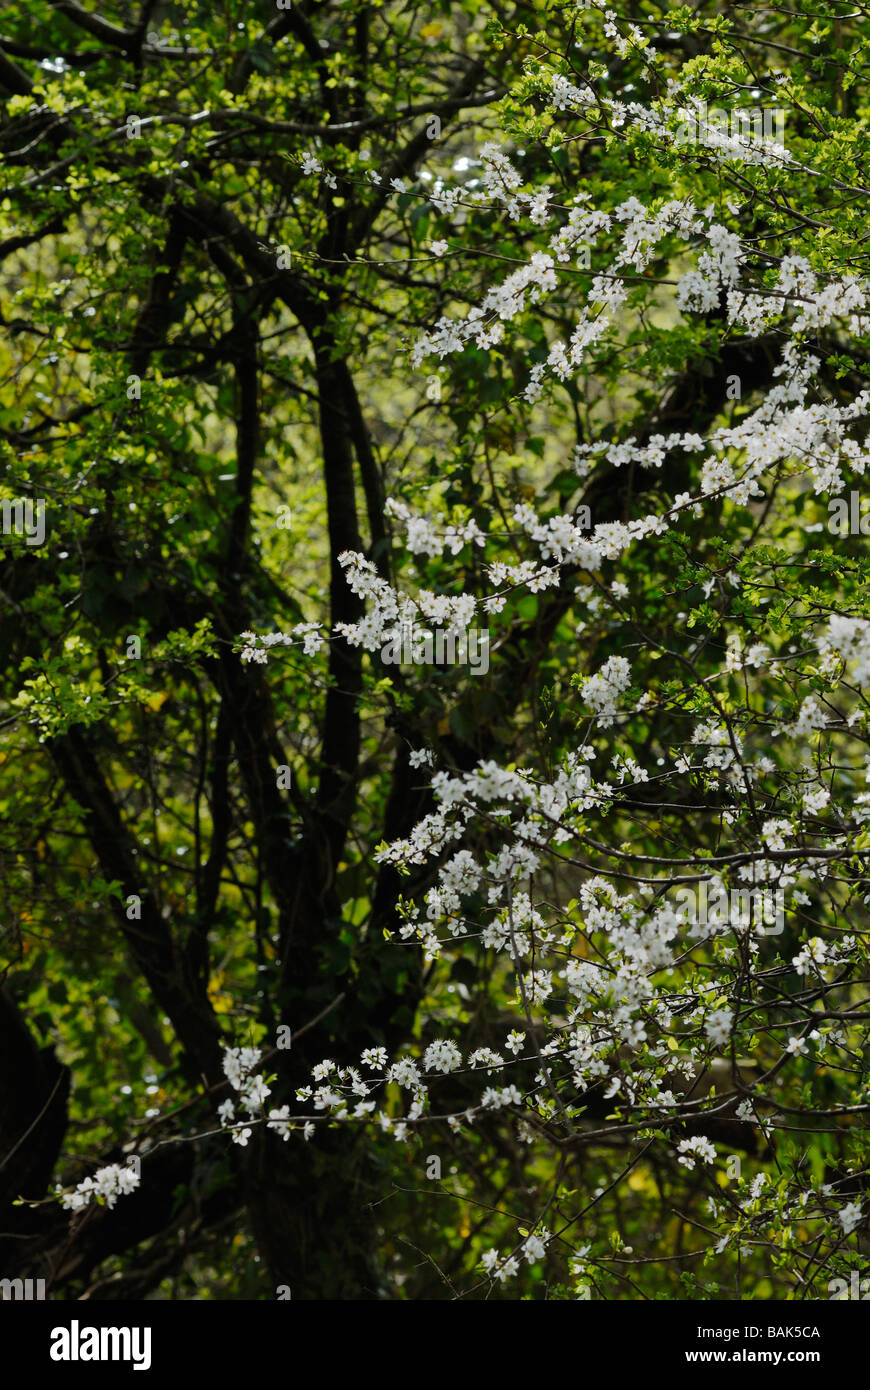 Blackthorn Prunus spinosa blossom in Spring set against the green of new Hawthorn leaves, Wales, UK. Stock Photo